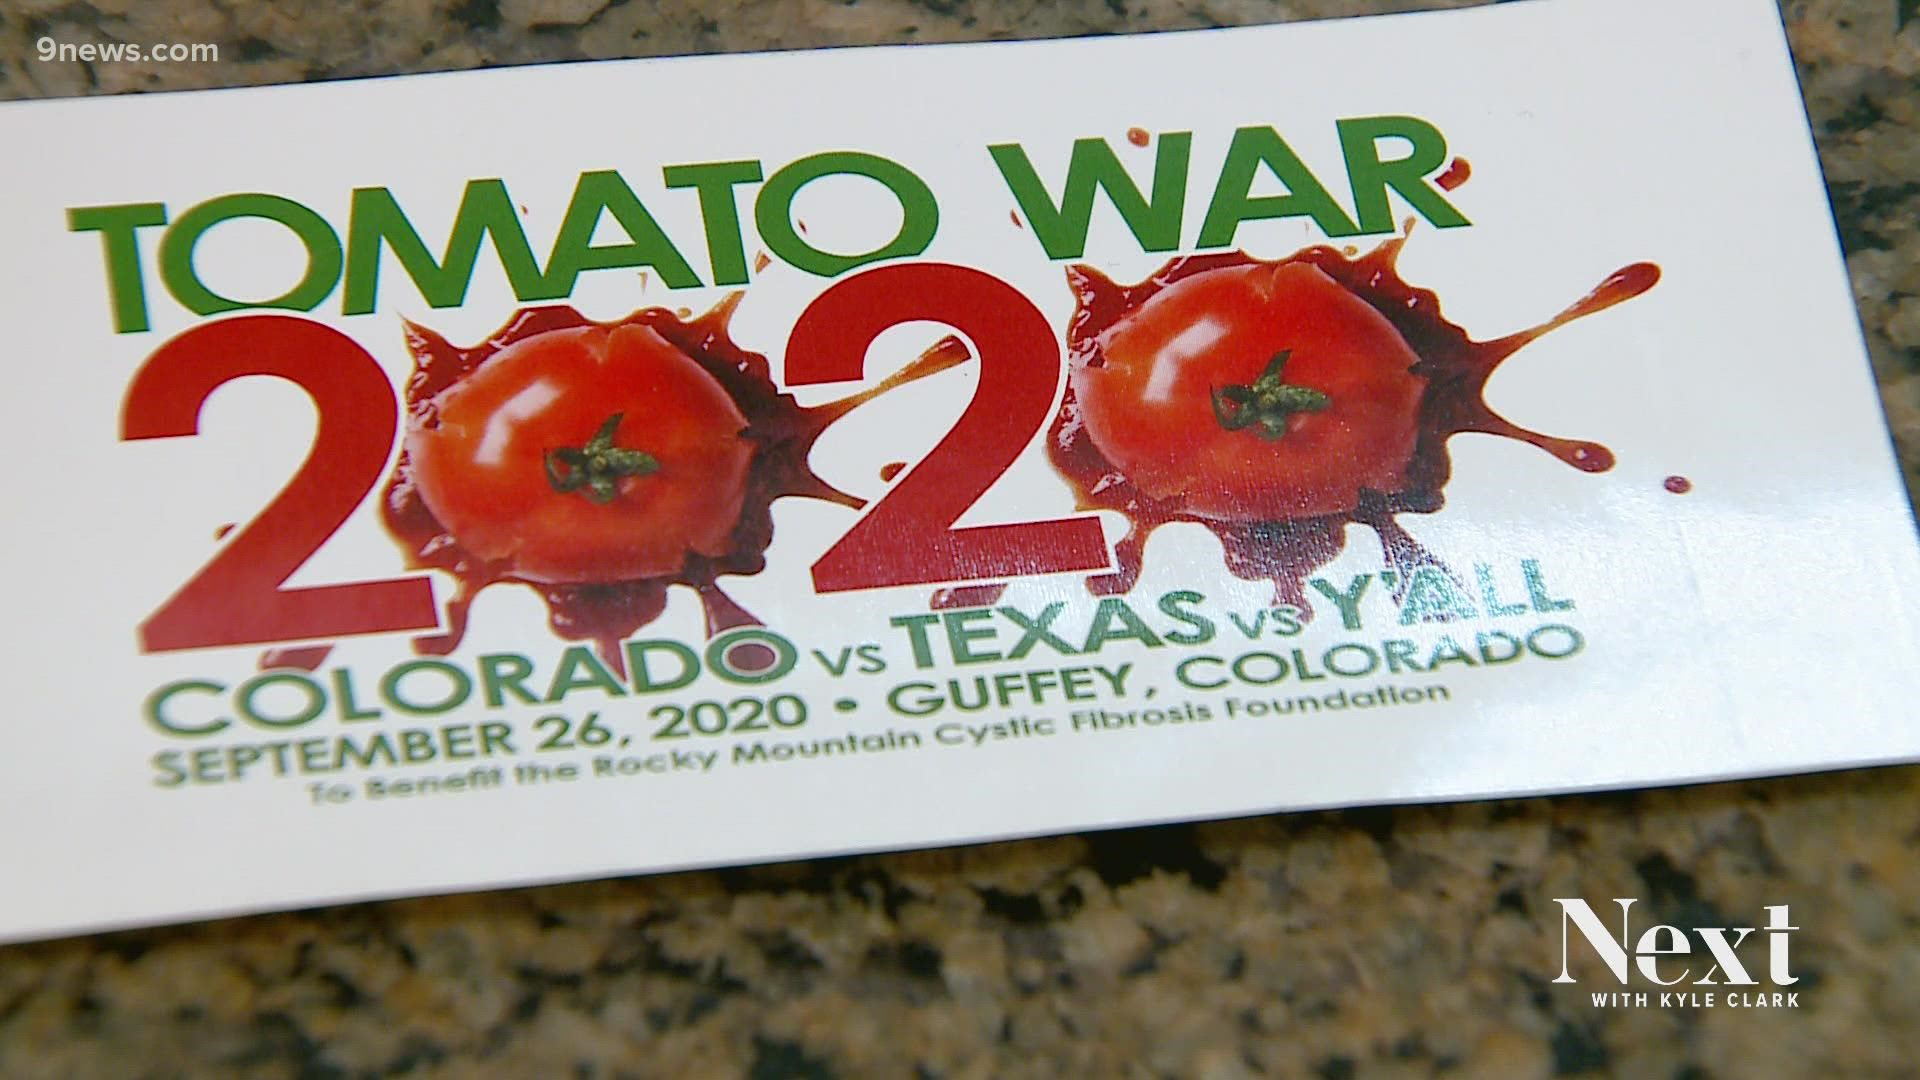 Texans and Coloradans will meet at the Meadows at Buena Vista for the 2021 battle on Sept. 18. Each side will be equipped with thousands of tomatoes.